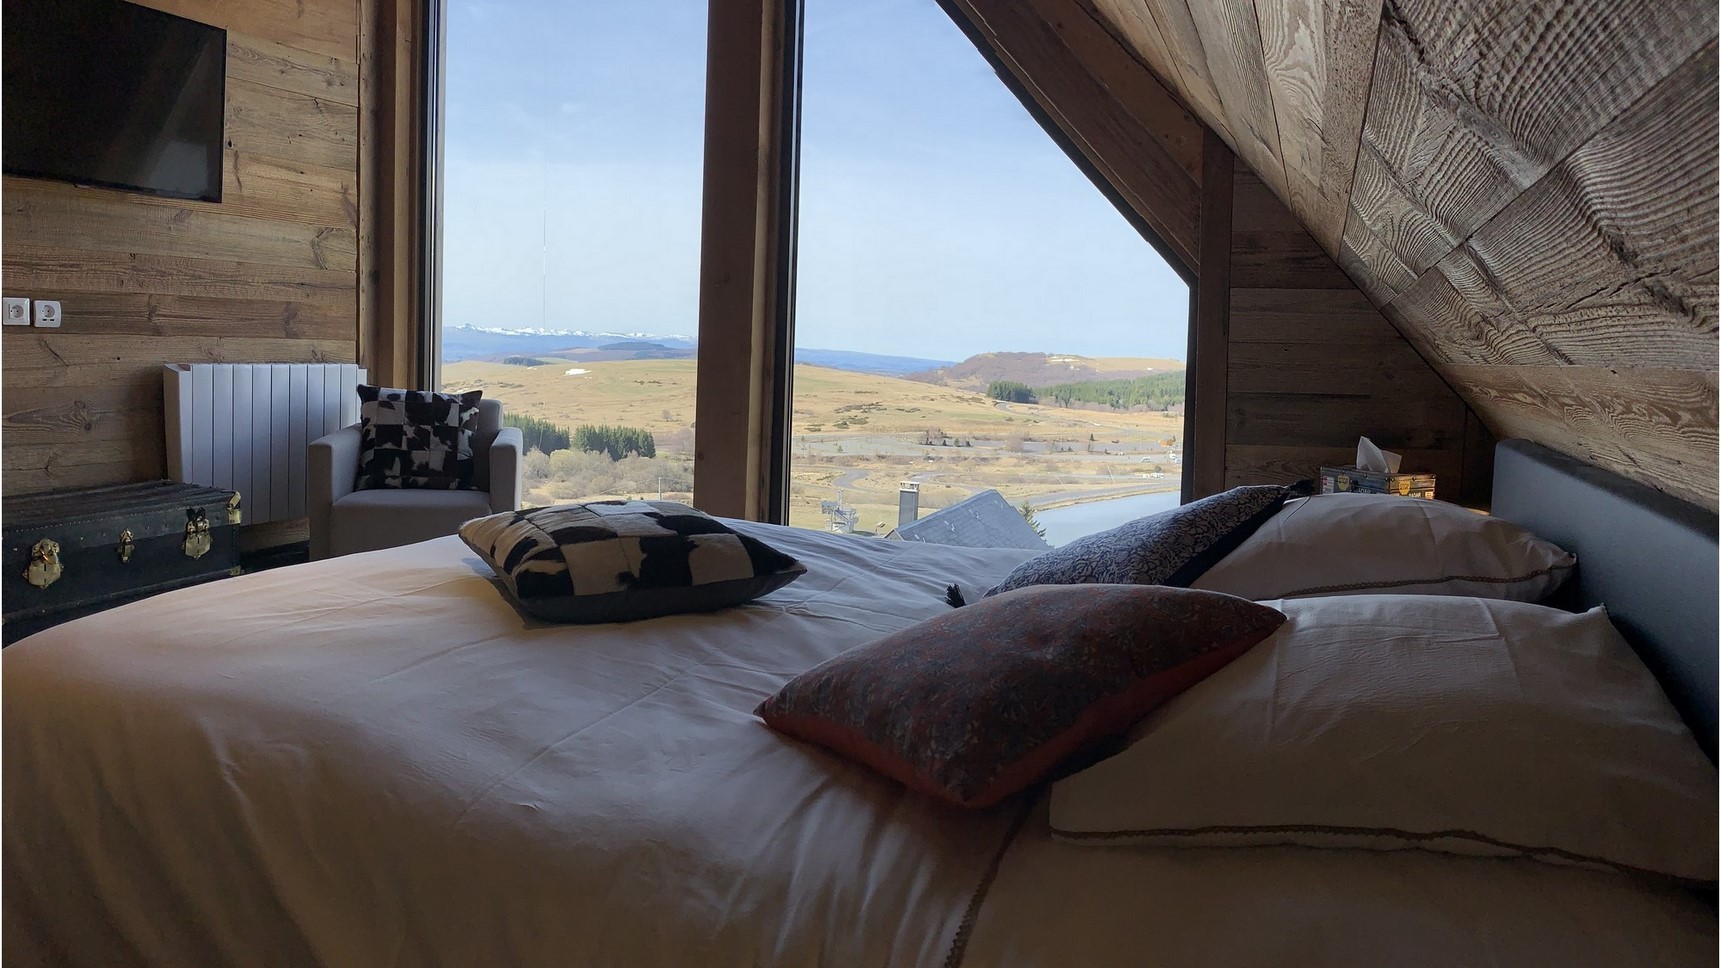 Super Besse chalet, Anorak chalet, Val d'Enfer bedroom, view of the Cantal mountains